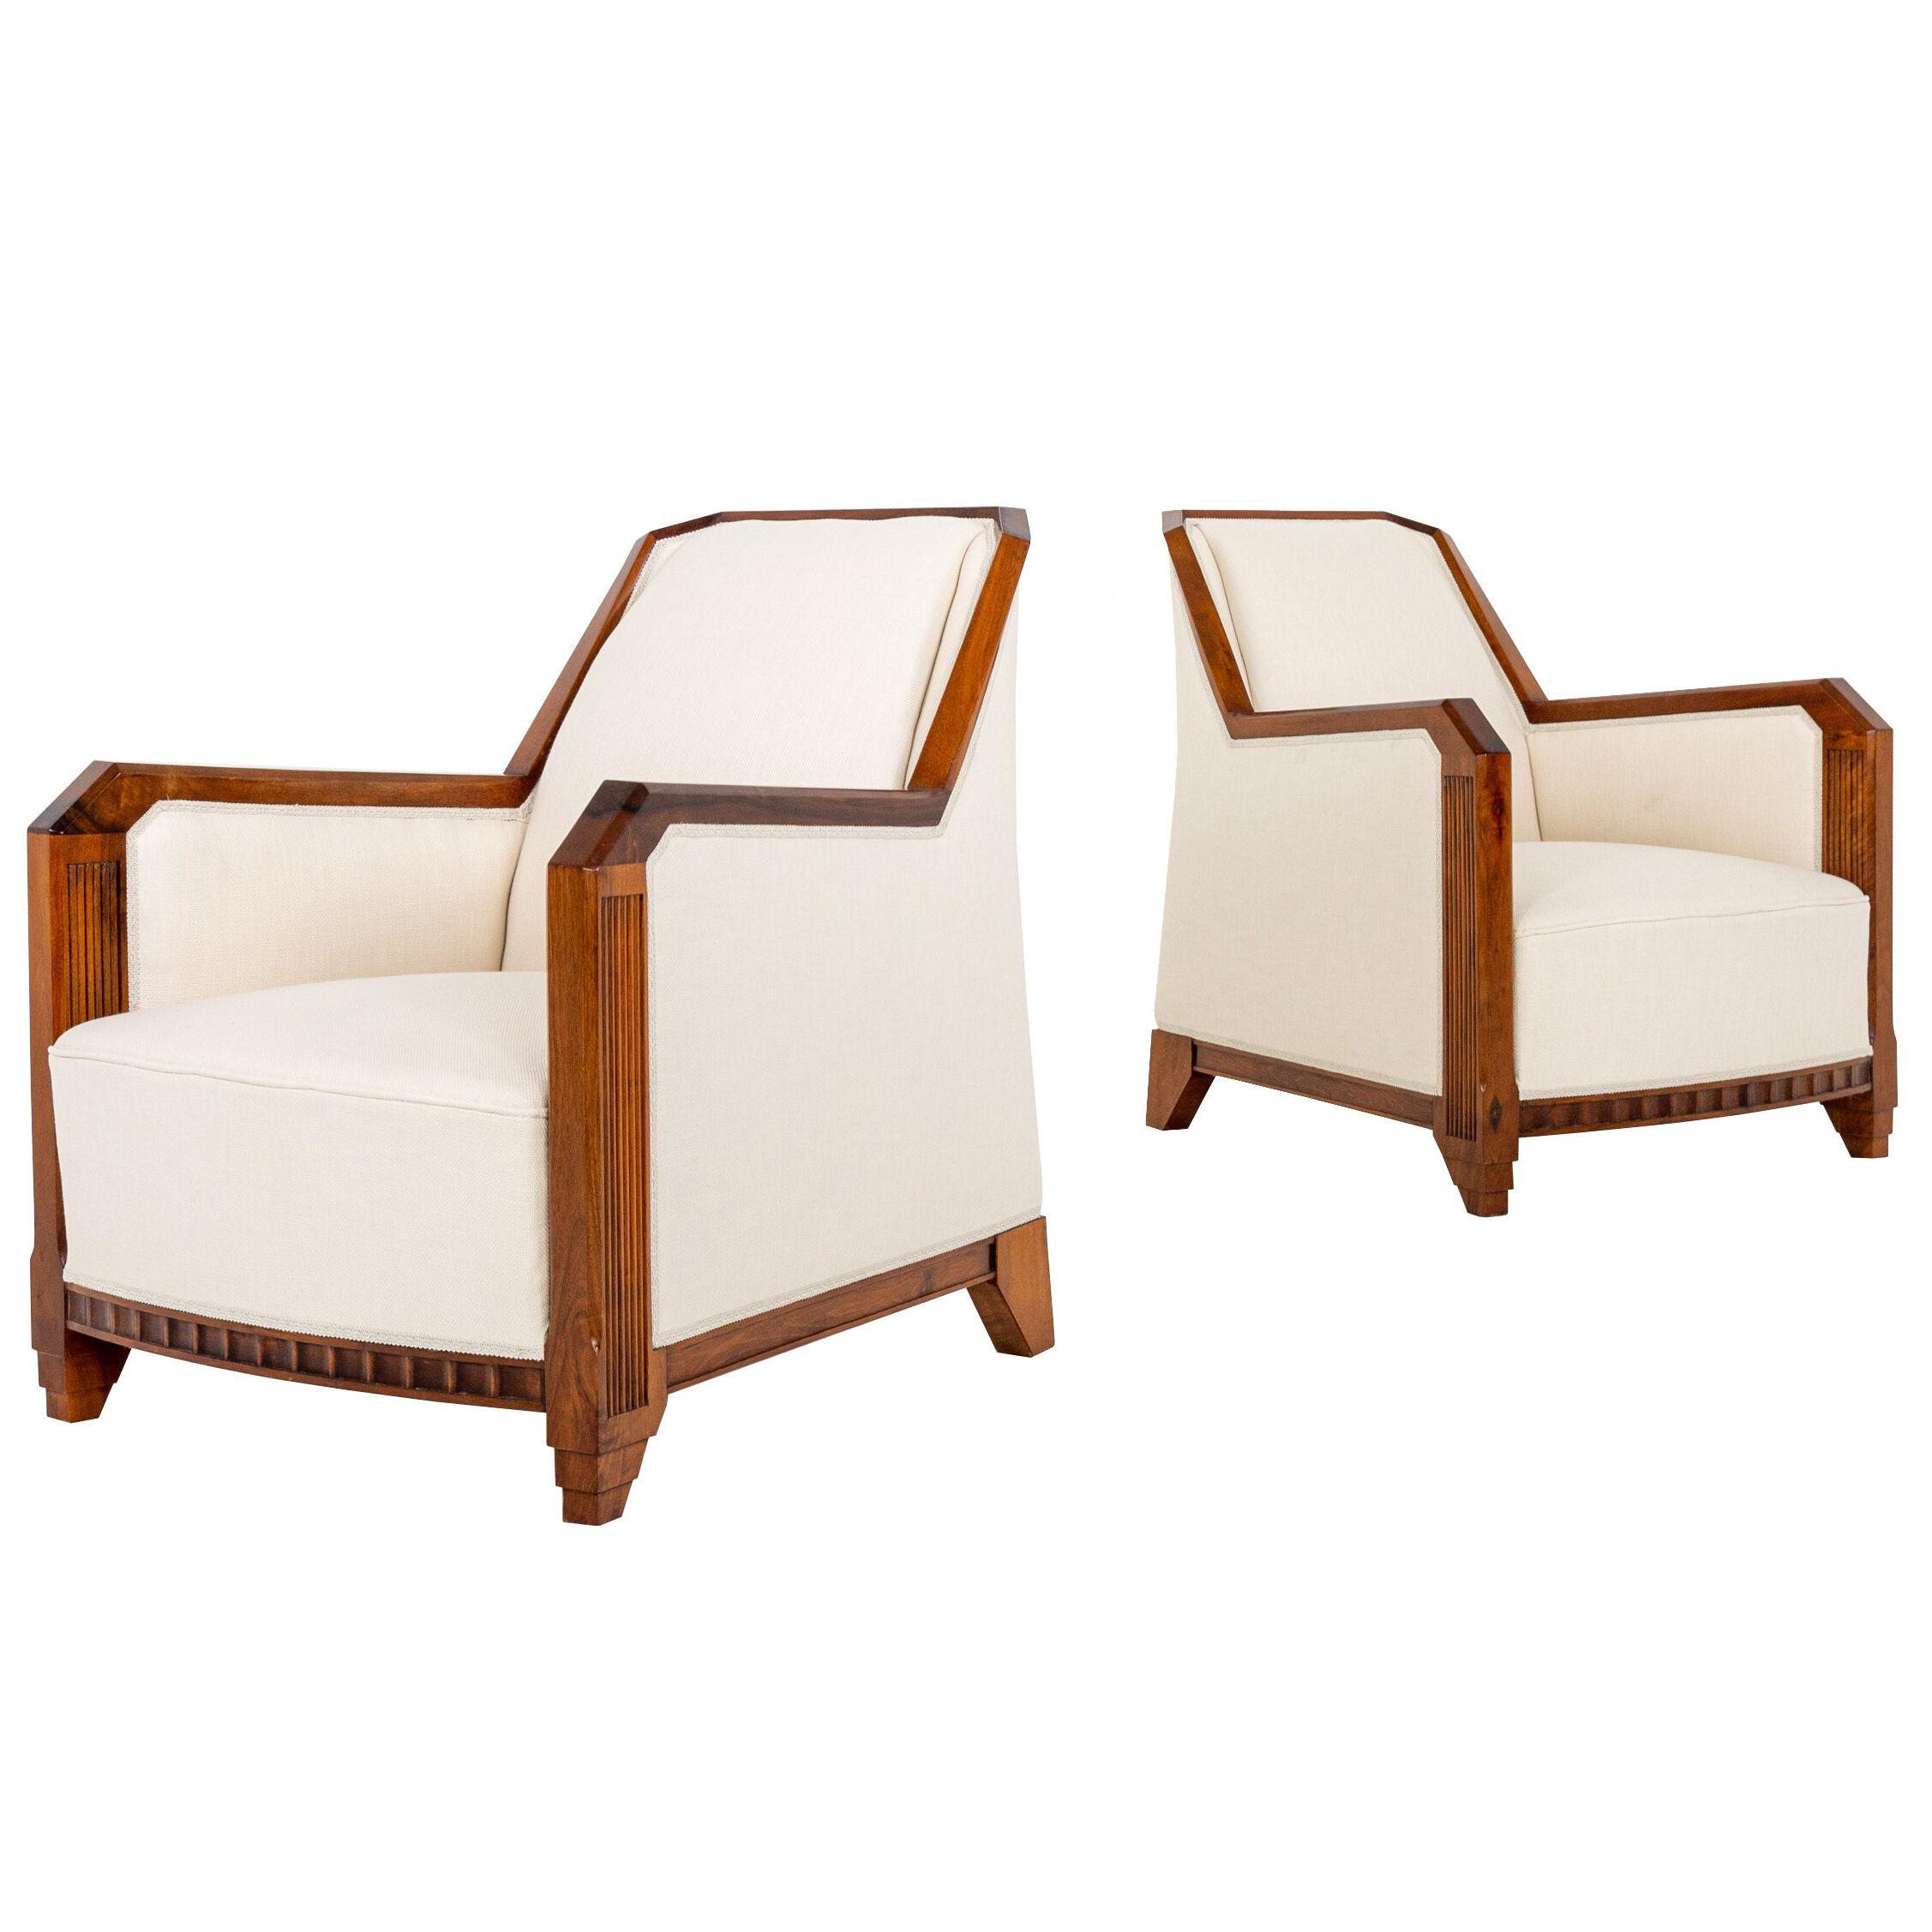 PAIR OF ART DECO CLUB CHAIRS